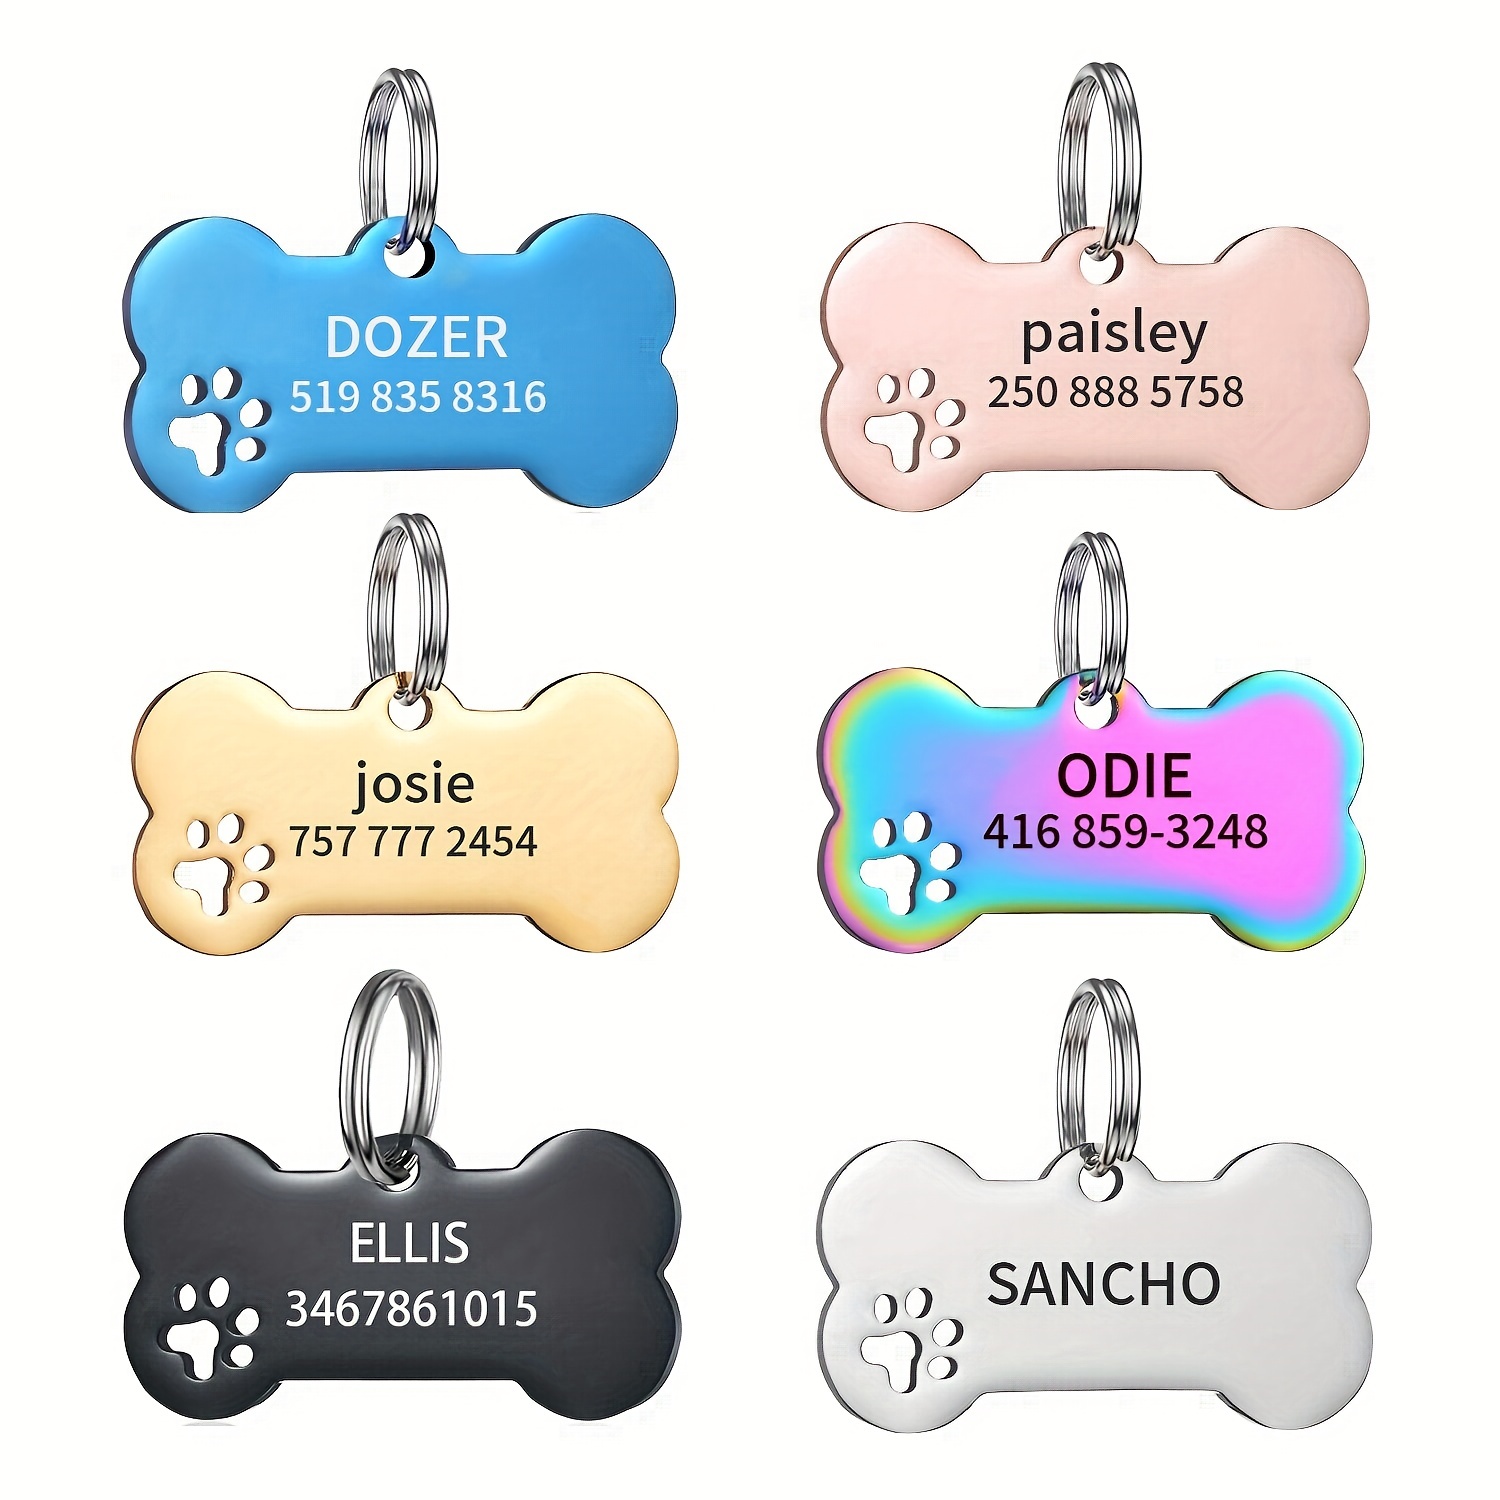 Reflective Neoprene Padded Dog Collar with Personalized Dog Bone ID Tag